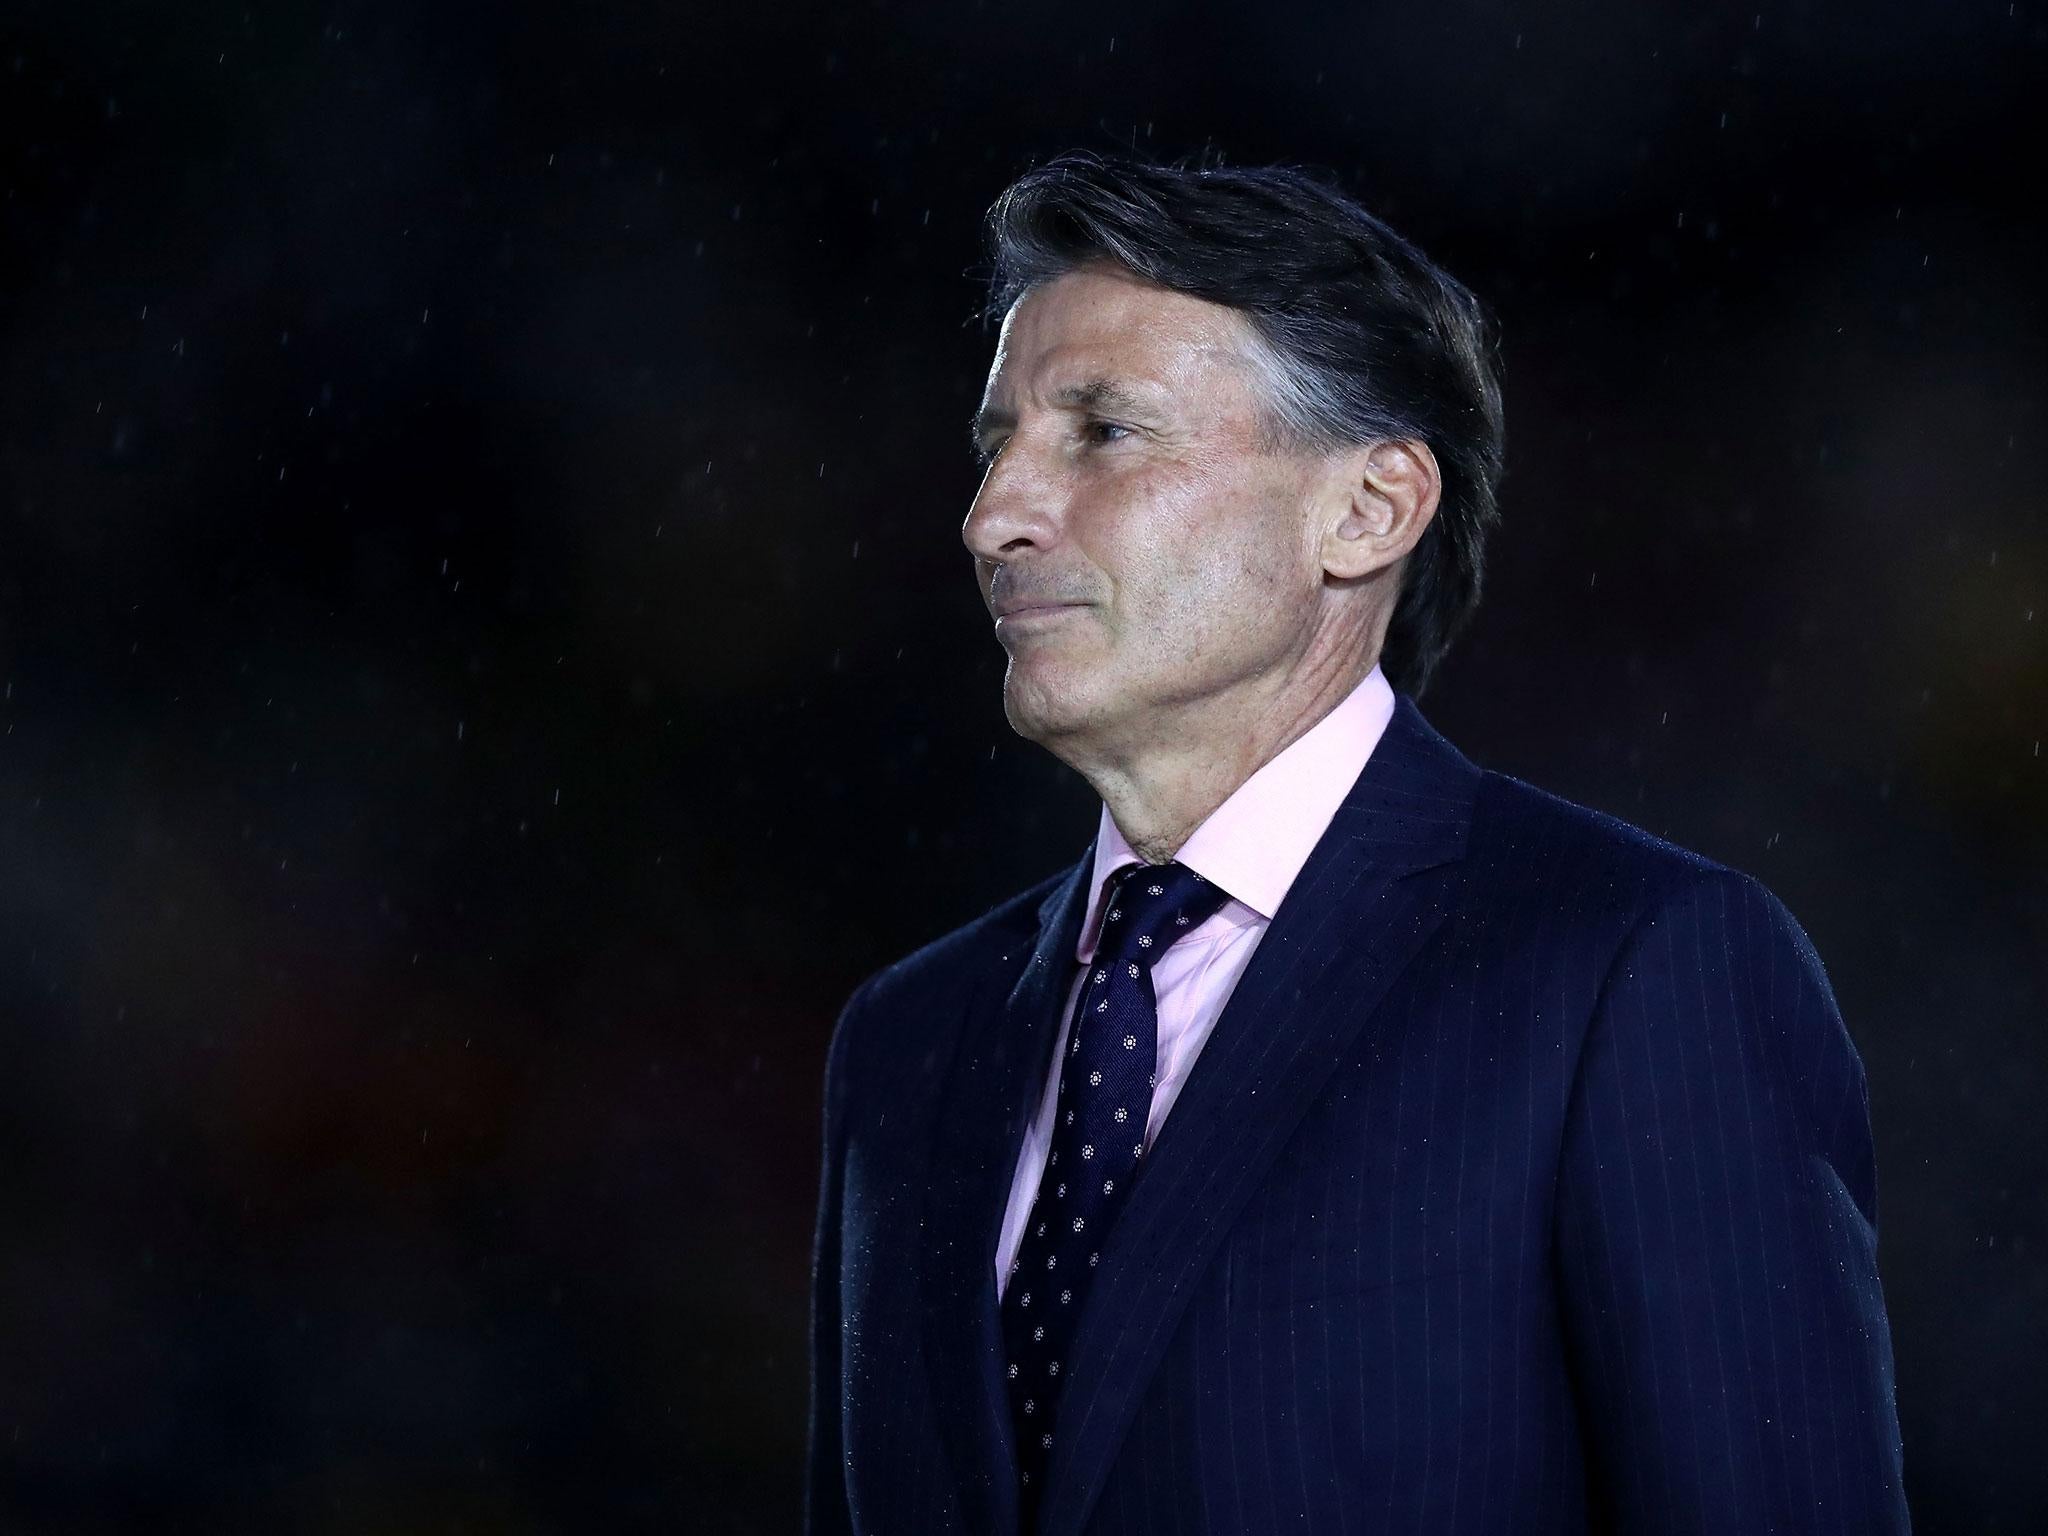 Coe’s position at the top of athletics governance seems untouchable